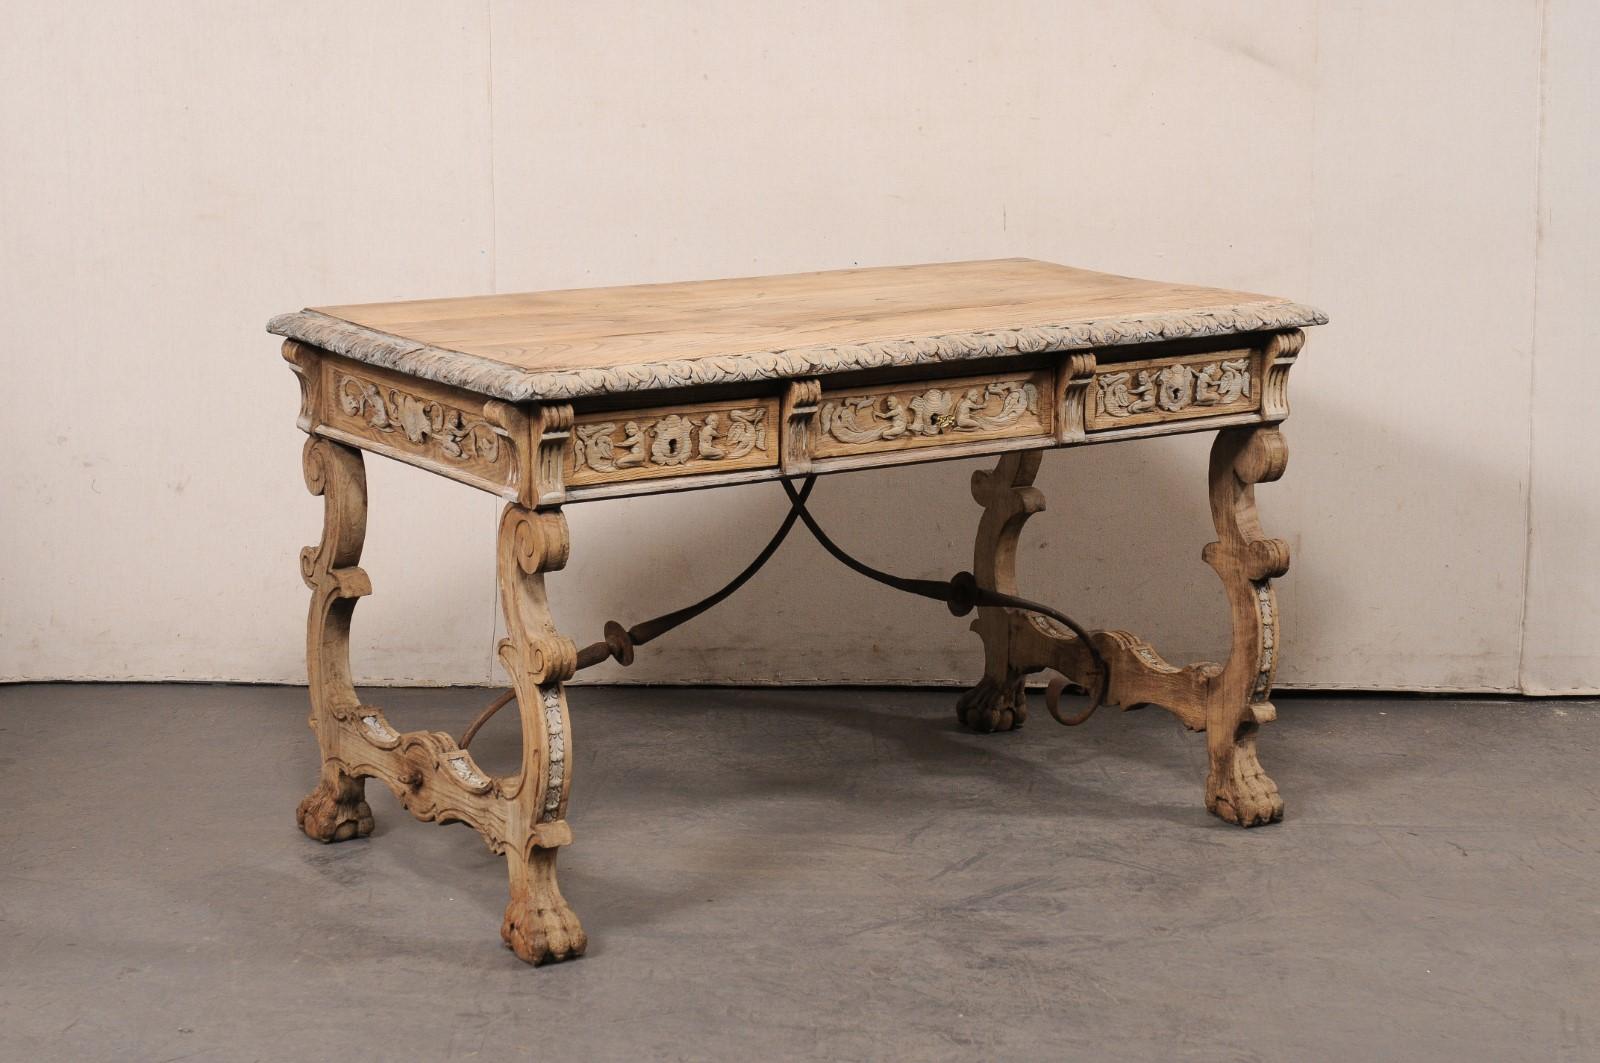 A Spanish elaborately carved wood desk, with trestle-legs and forged-iron stretchers, from the turn of the 19th and 20th century. This antique table from Spain has a rectangular-shaped top with leaf carved trim about the perimeter edges, which